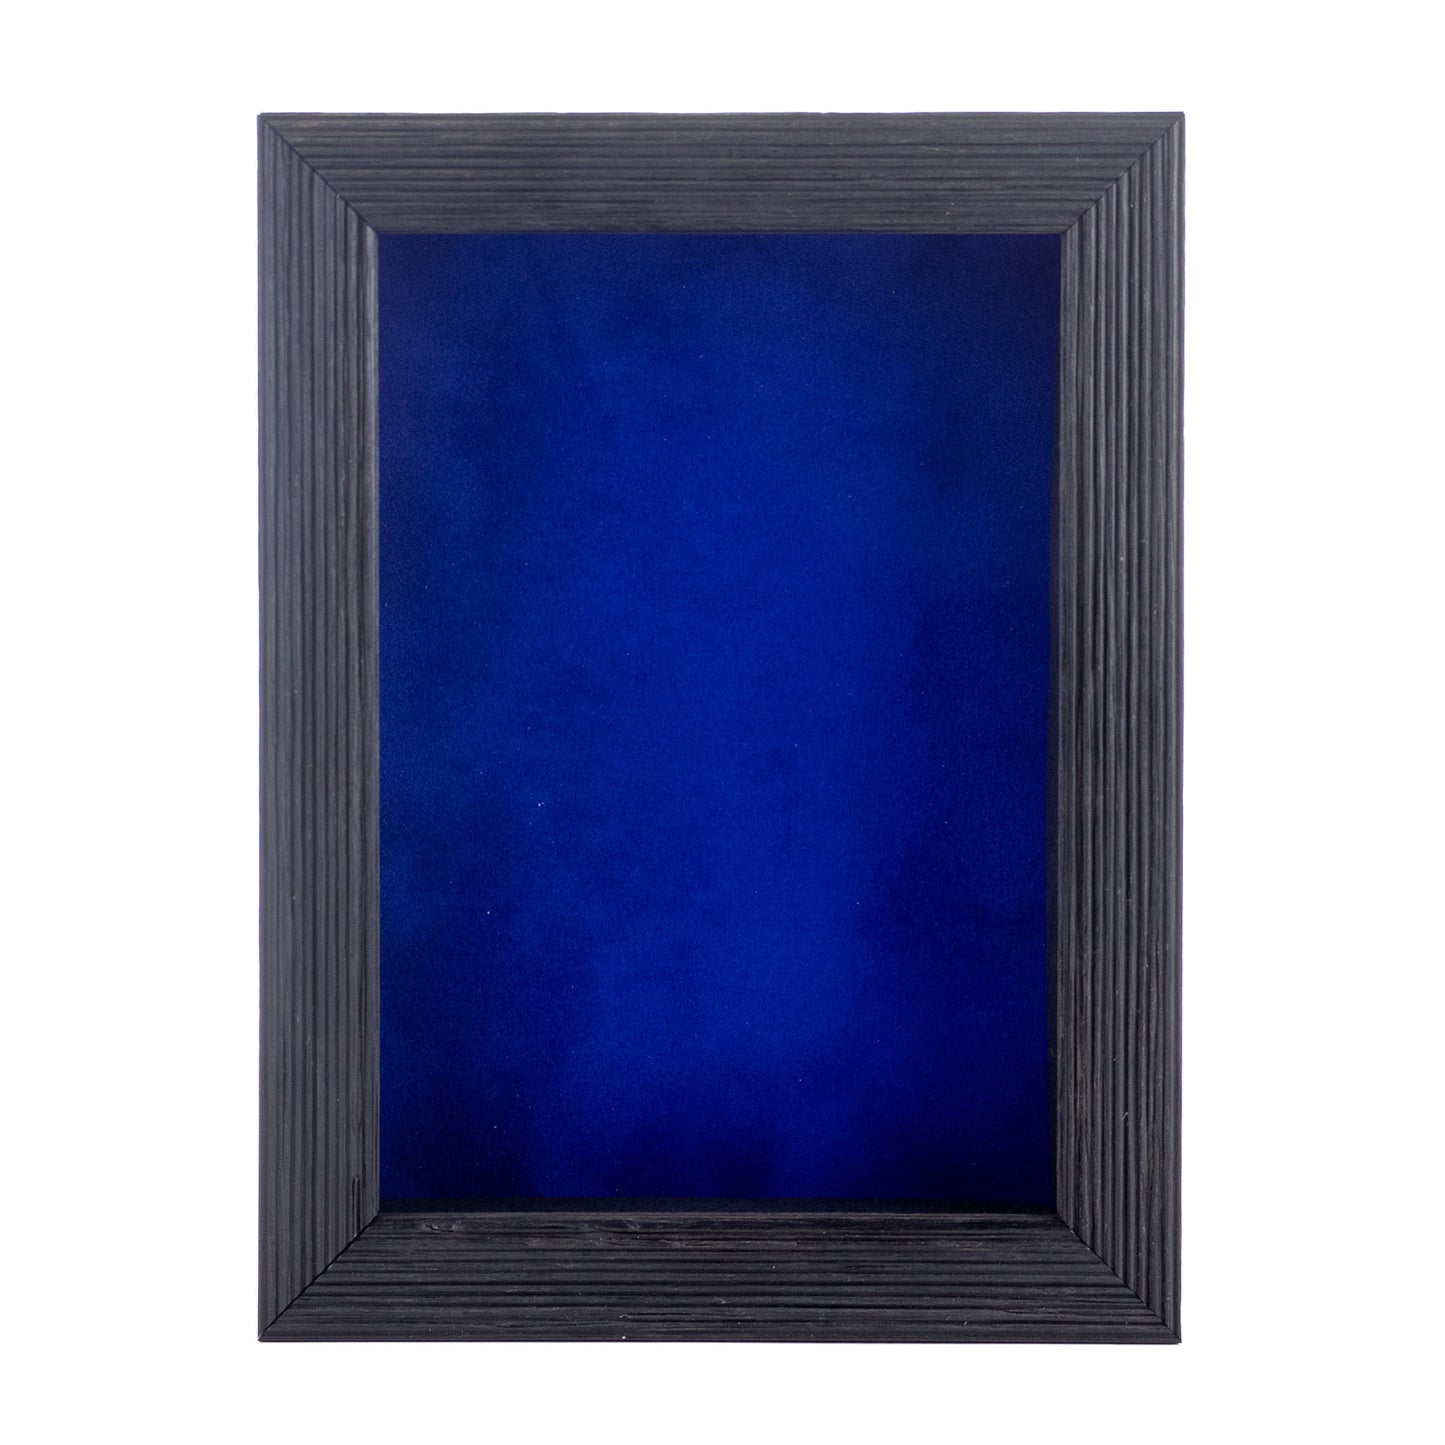 Distressed Black Shadow Box Frame With Royal Blue Acid-Free Suede Backing